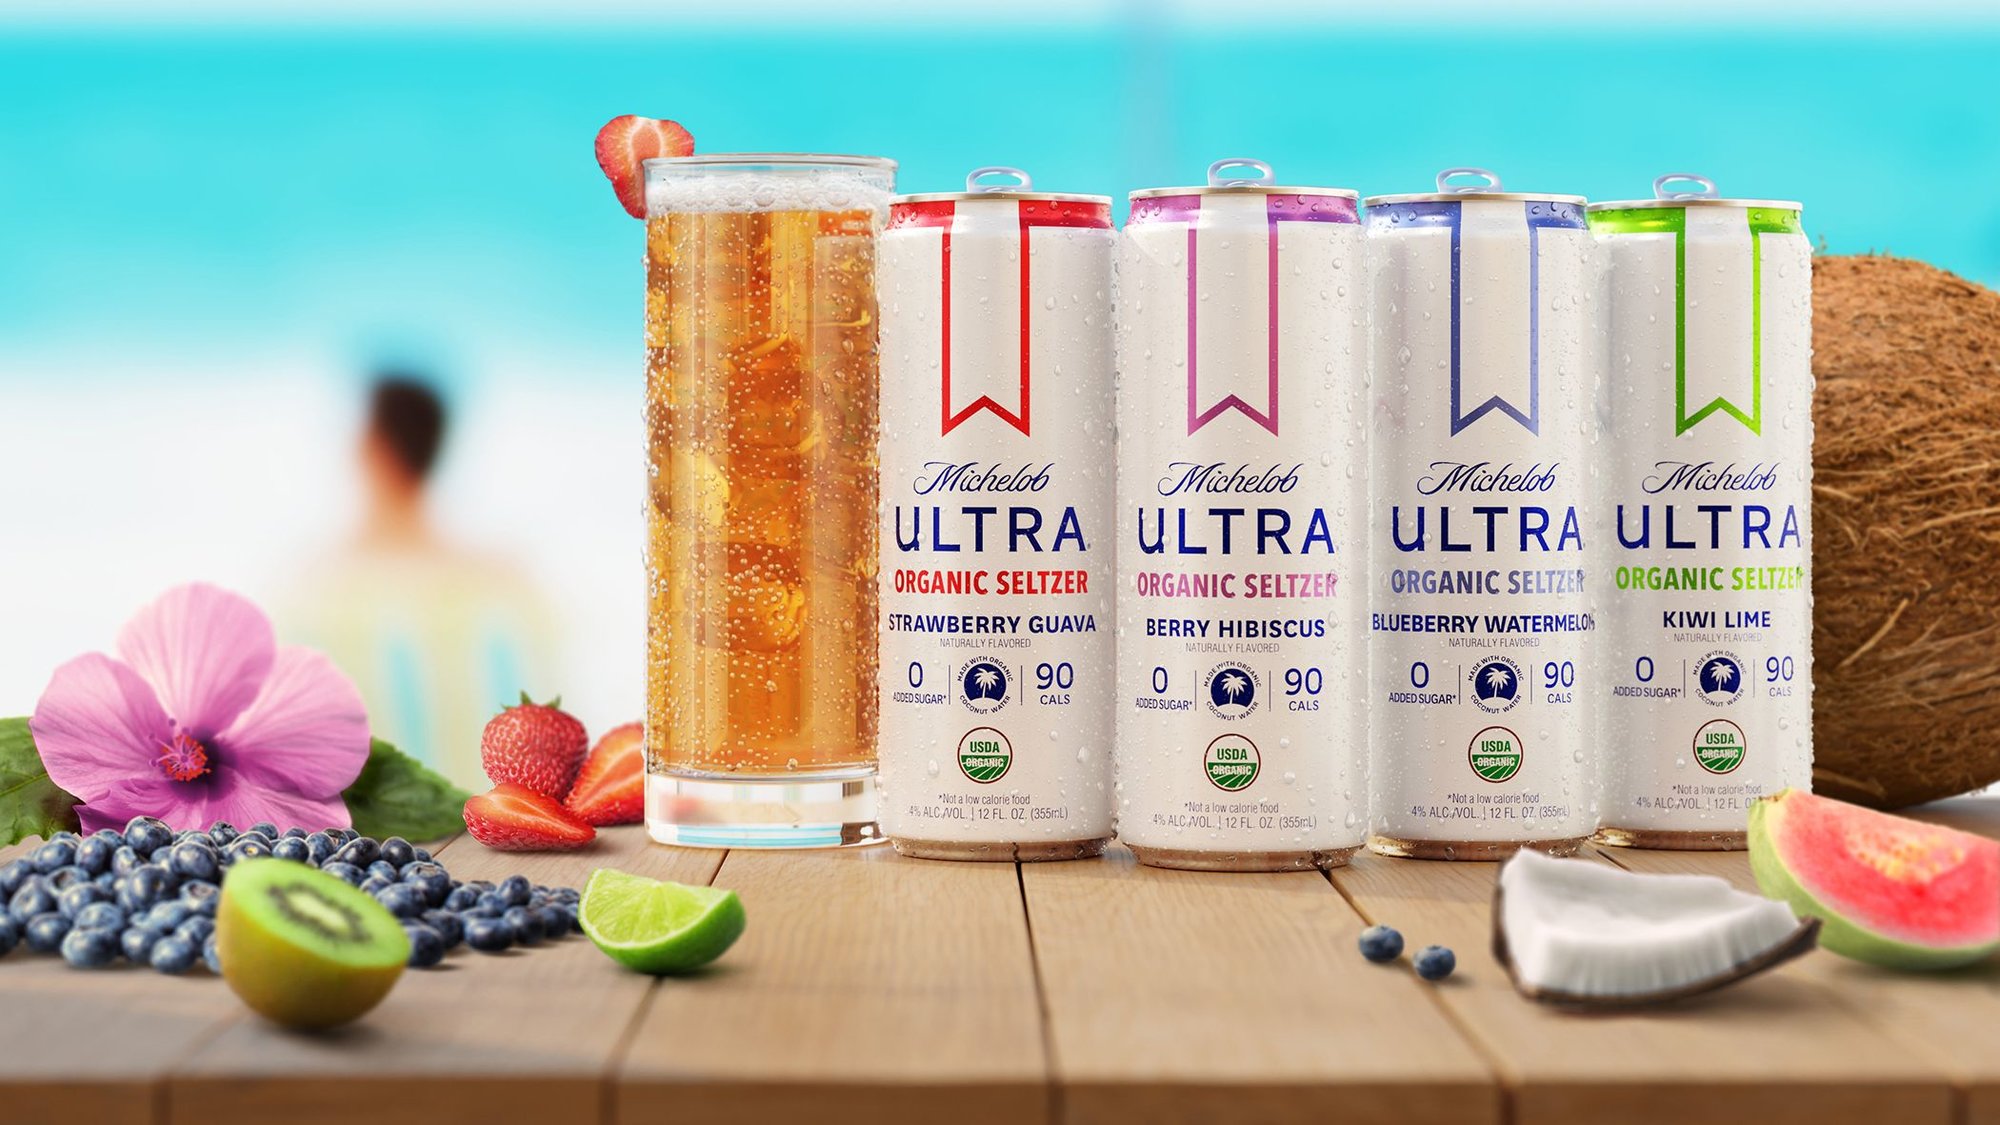 michelob-ultra-organic-seltzer-berry-hibiscus-coconut-michelob-ultra